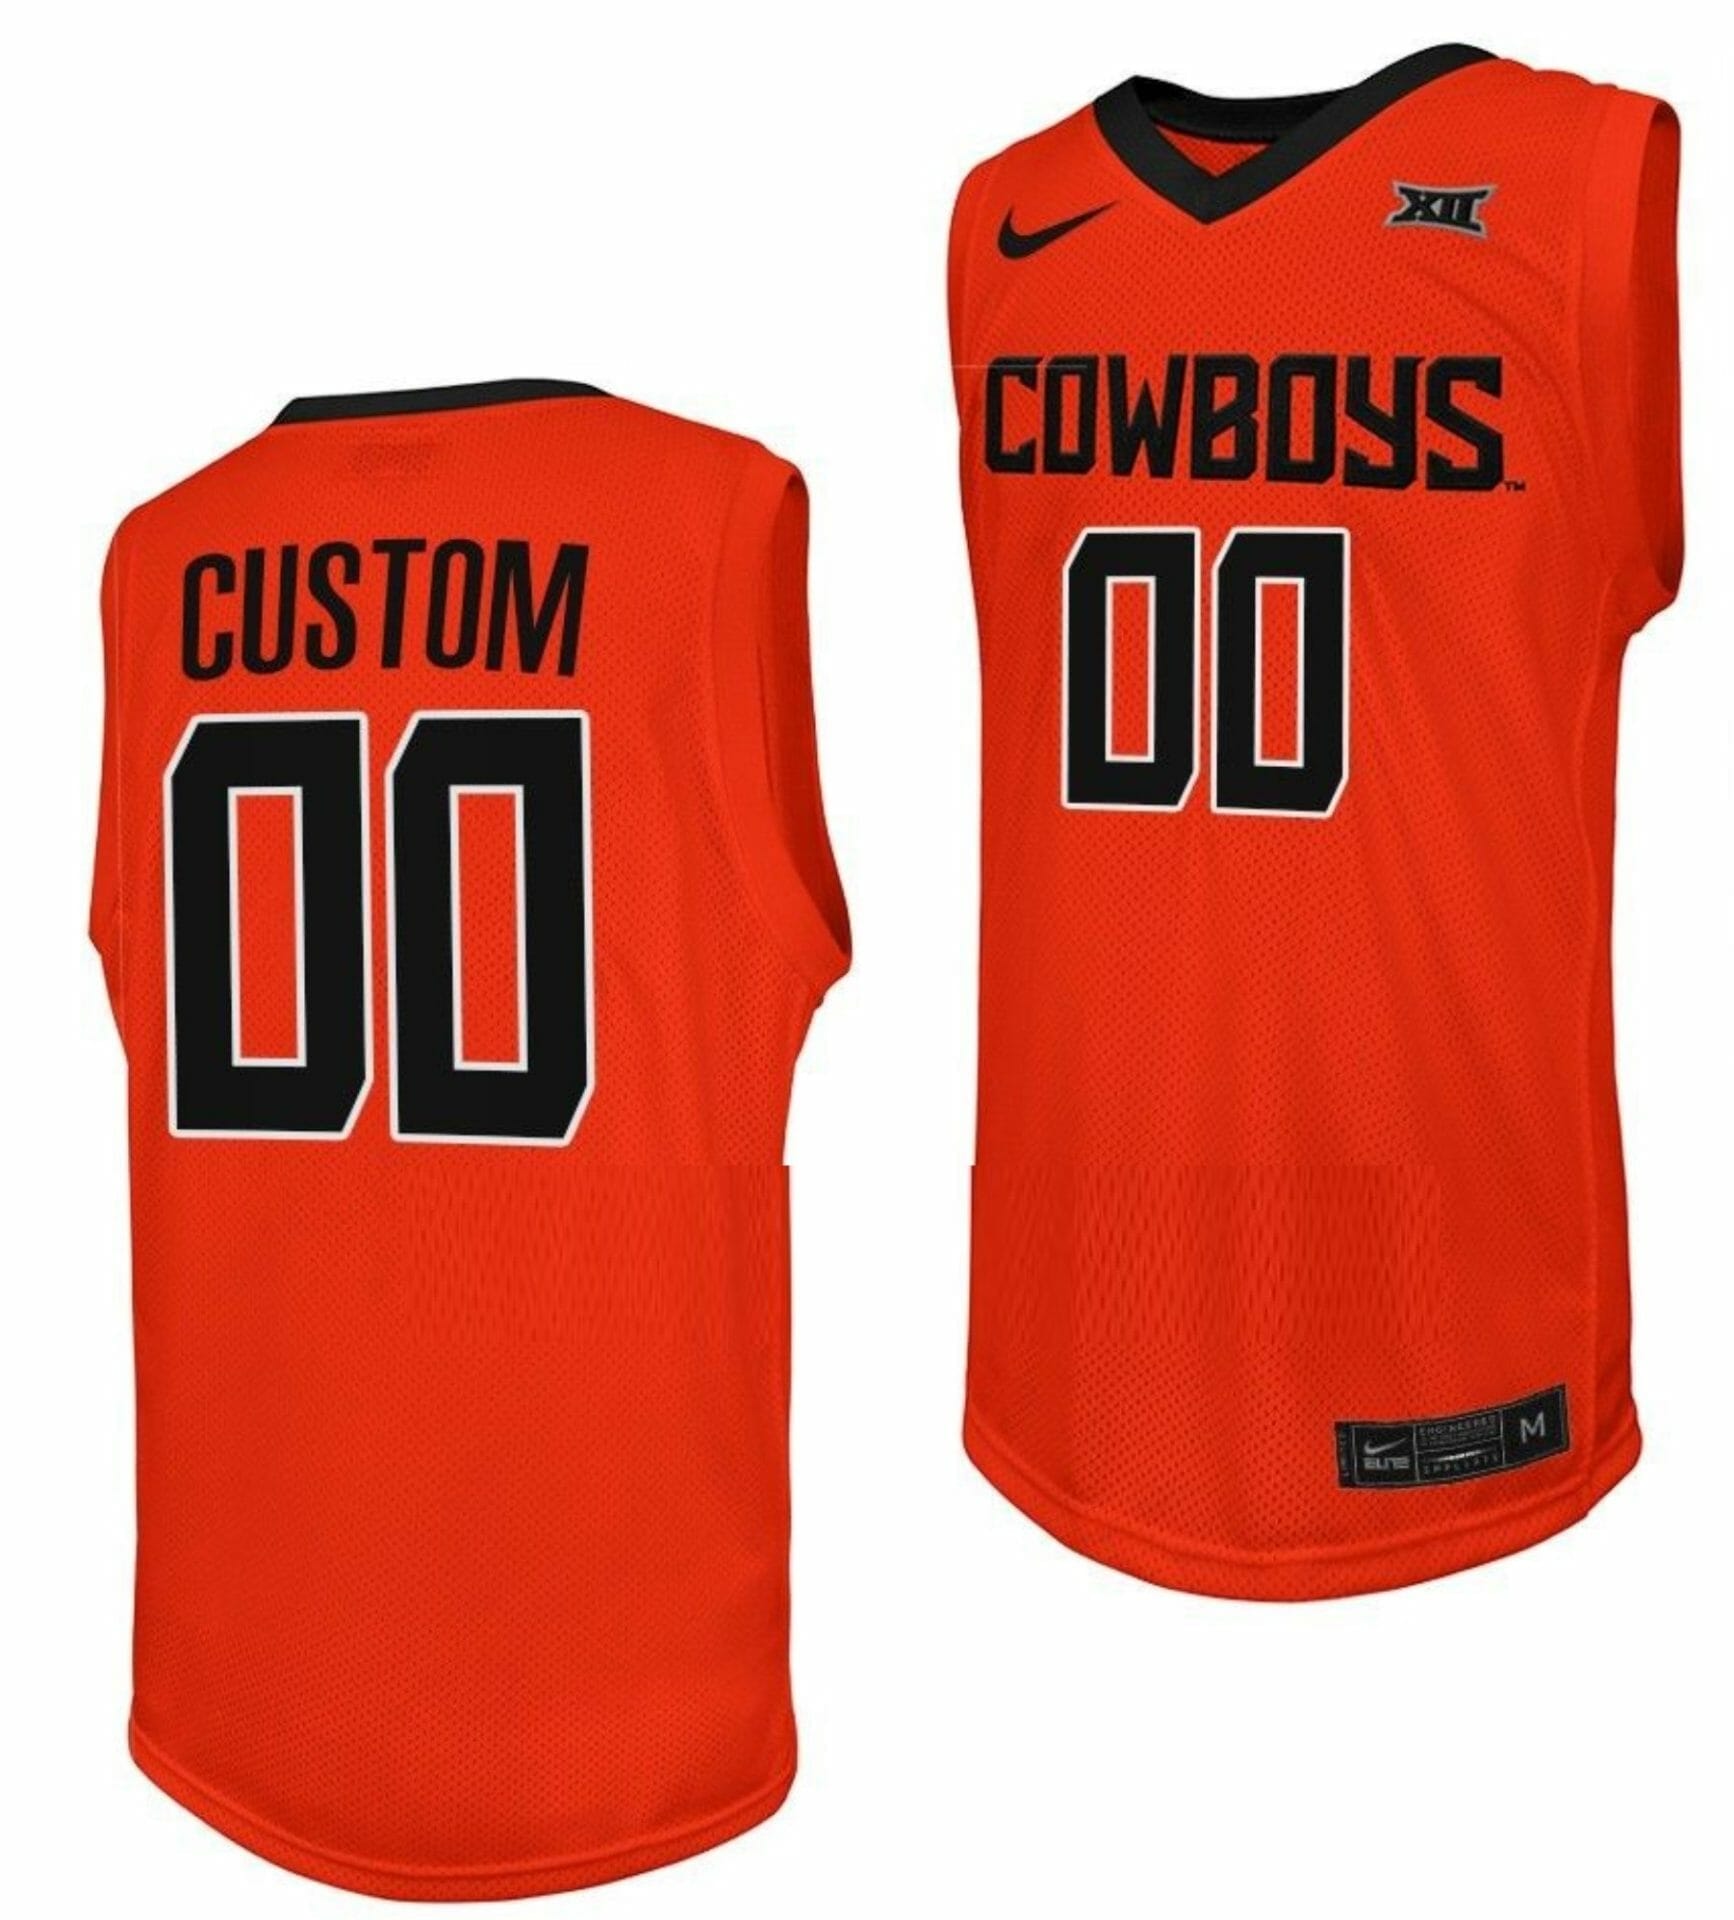 Custom College Basketball Jerseys Oklahoma State Cowboys Jersey Name and Number Orange